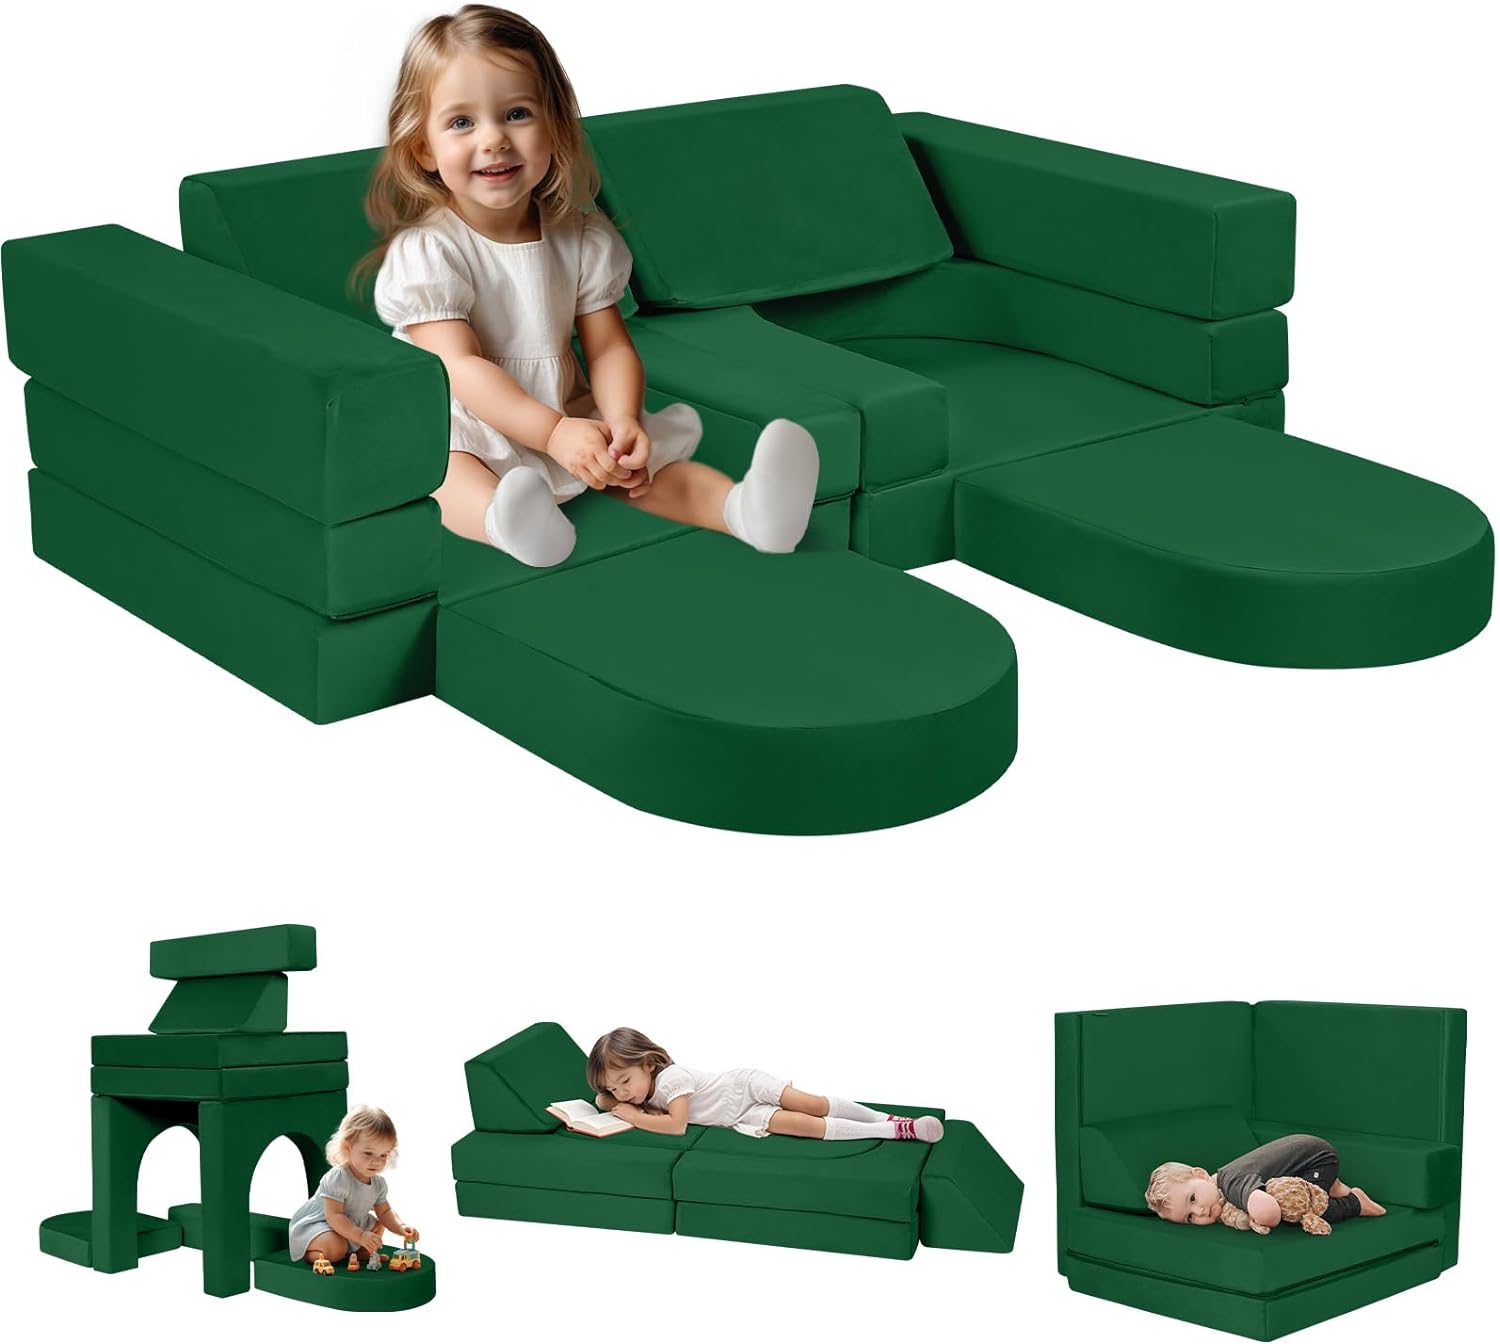 MeMoreCool 10-Piece Couch Sofa, Modular Toddler Glow Sofa for Playroom Bedroom, Fold Out Play Couch for Kid Girl Boy, Sectional Foam Playset Couch Set, Green